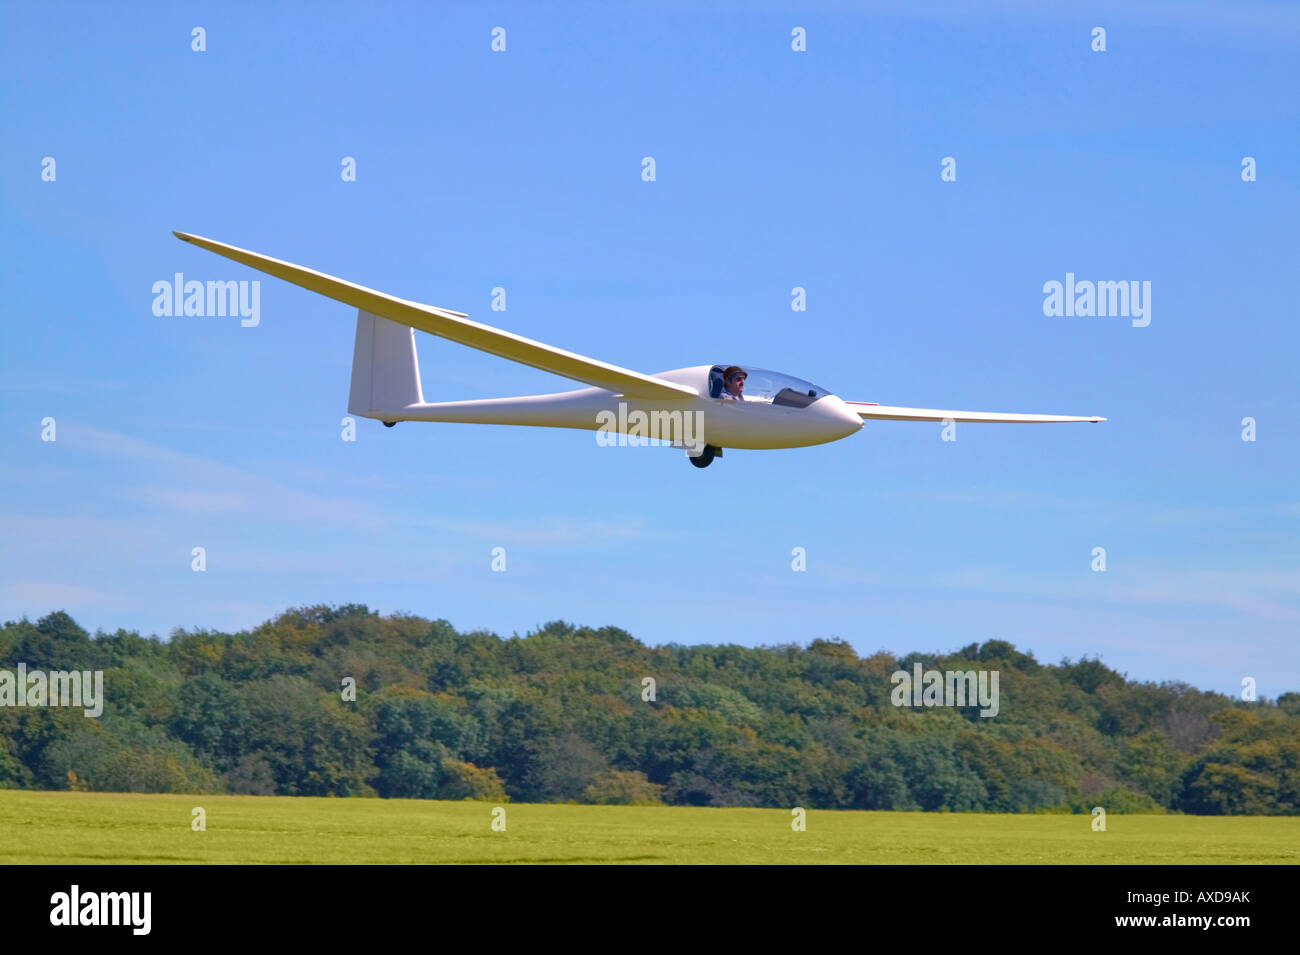 A modern glider just about to land on a grass airfield Stock Photo